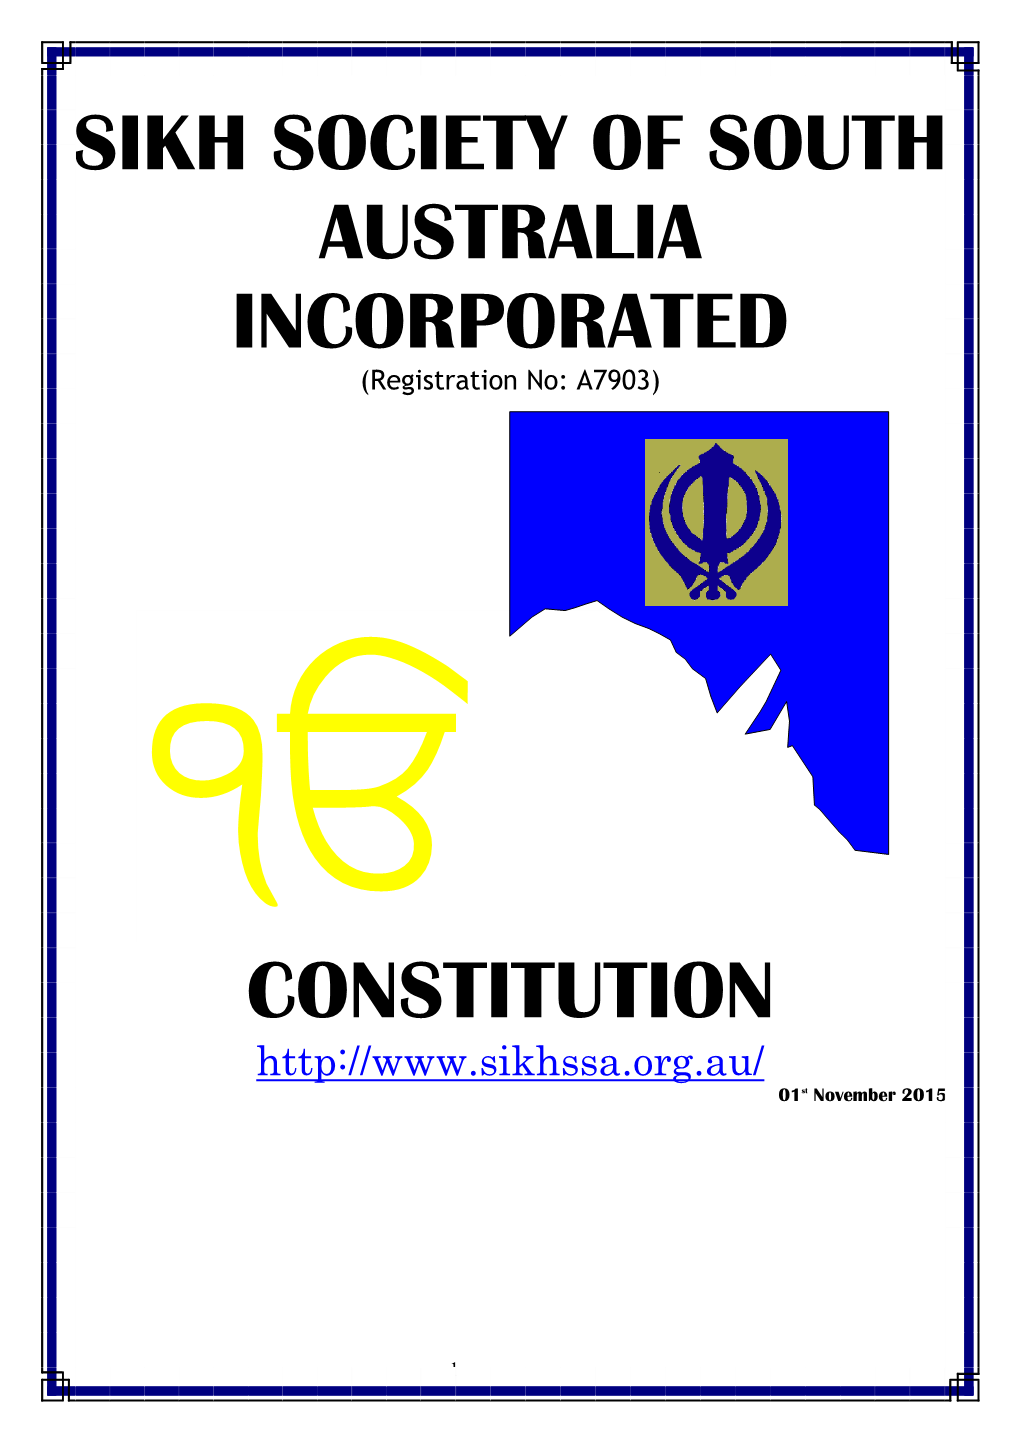 SIKH SOCIETY of SOUTH AUSTRALIA INCORPORATED (Registration No: A7903)